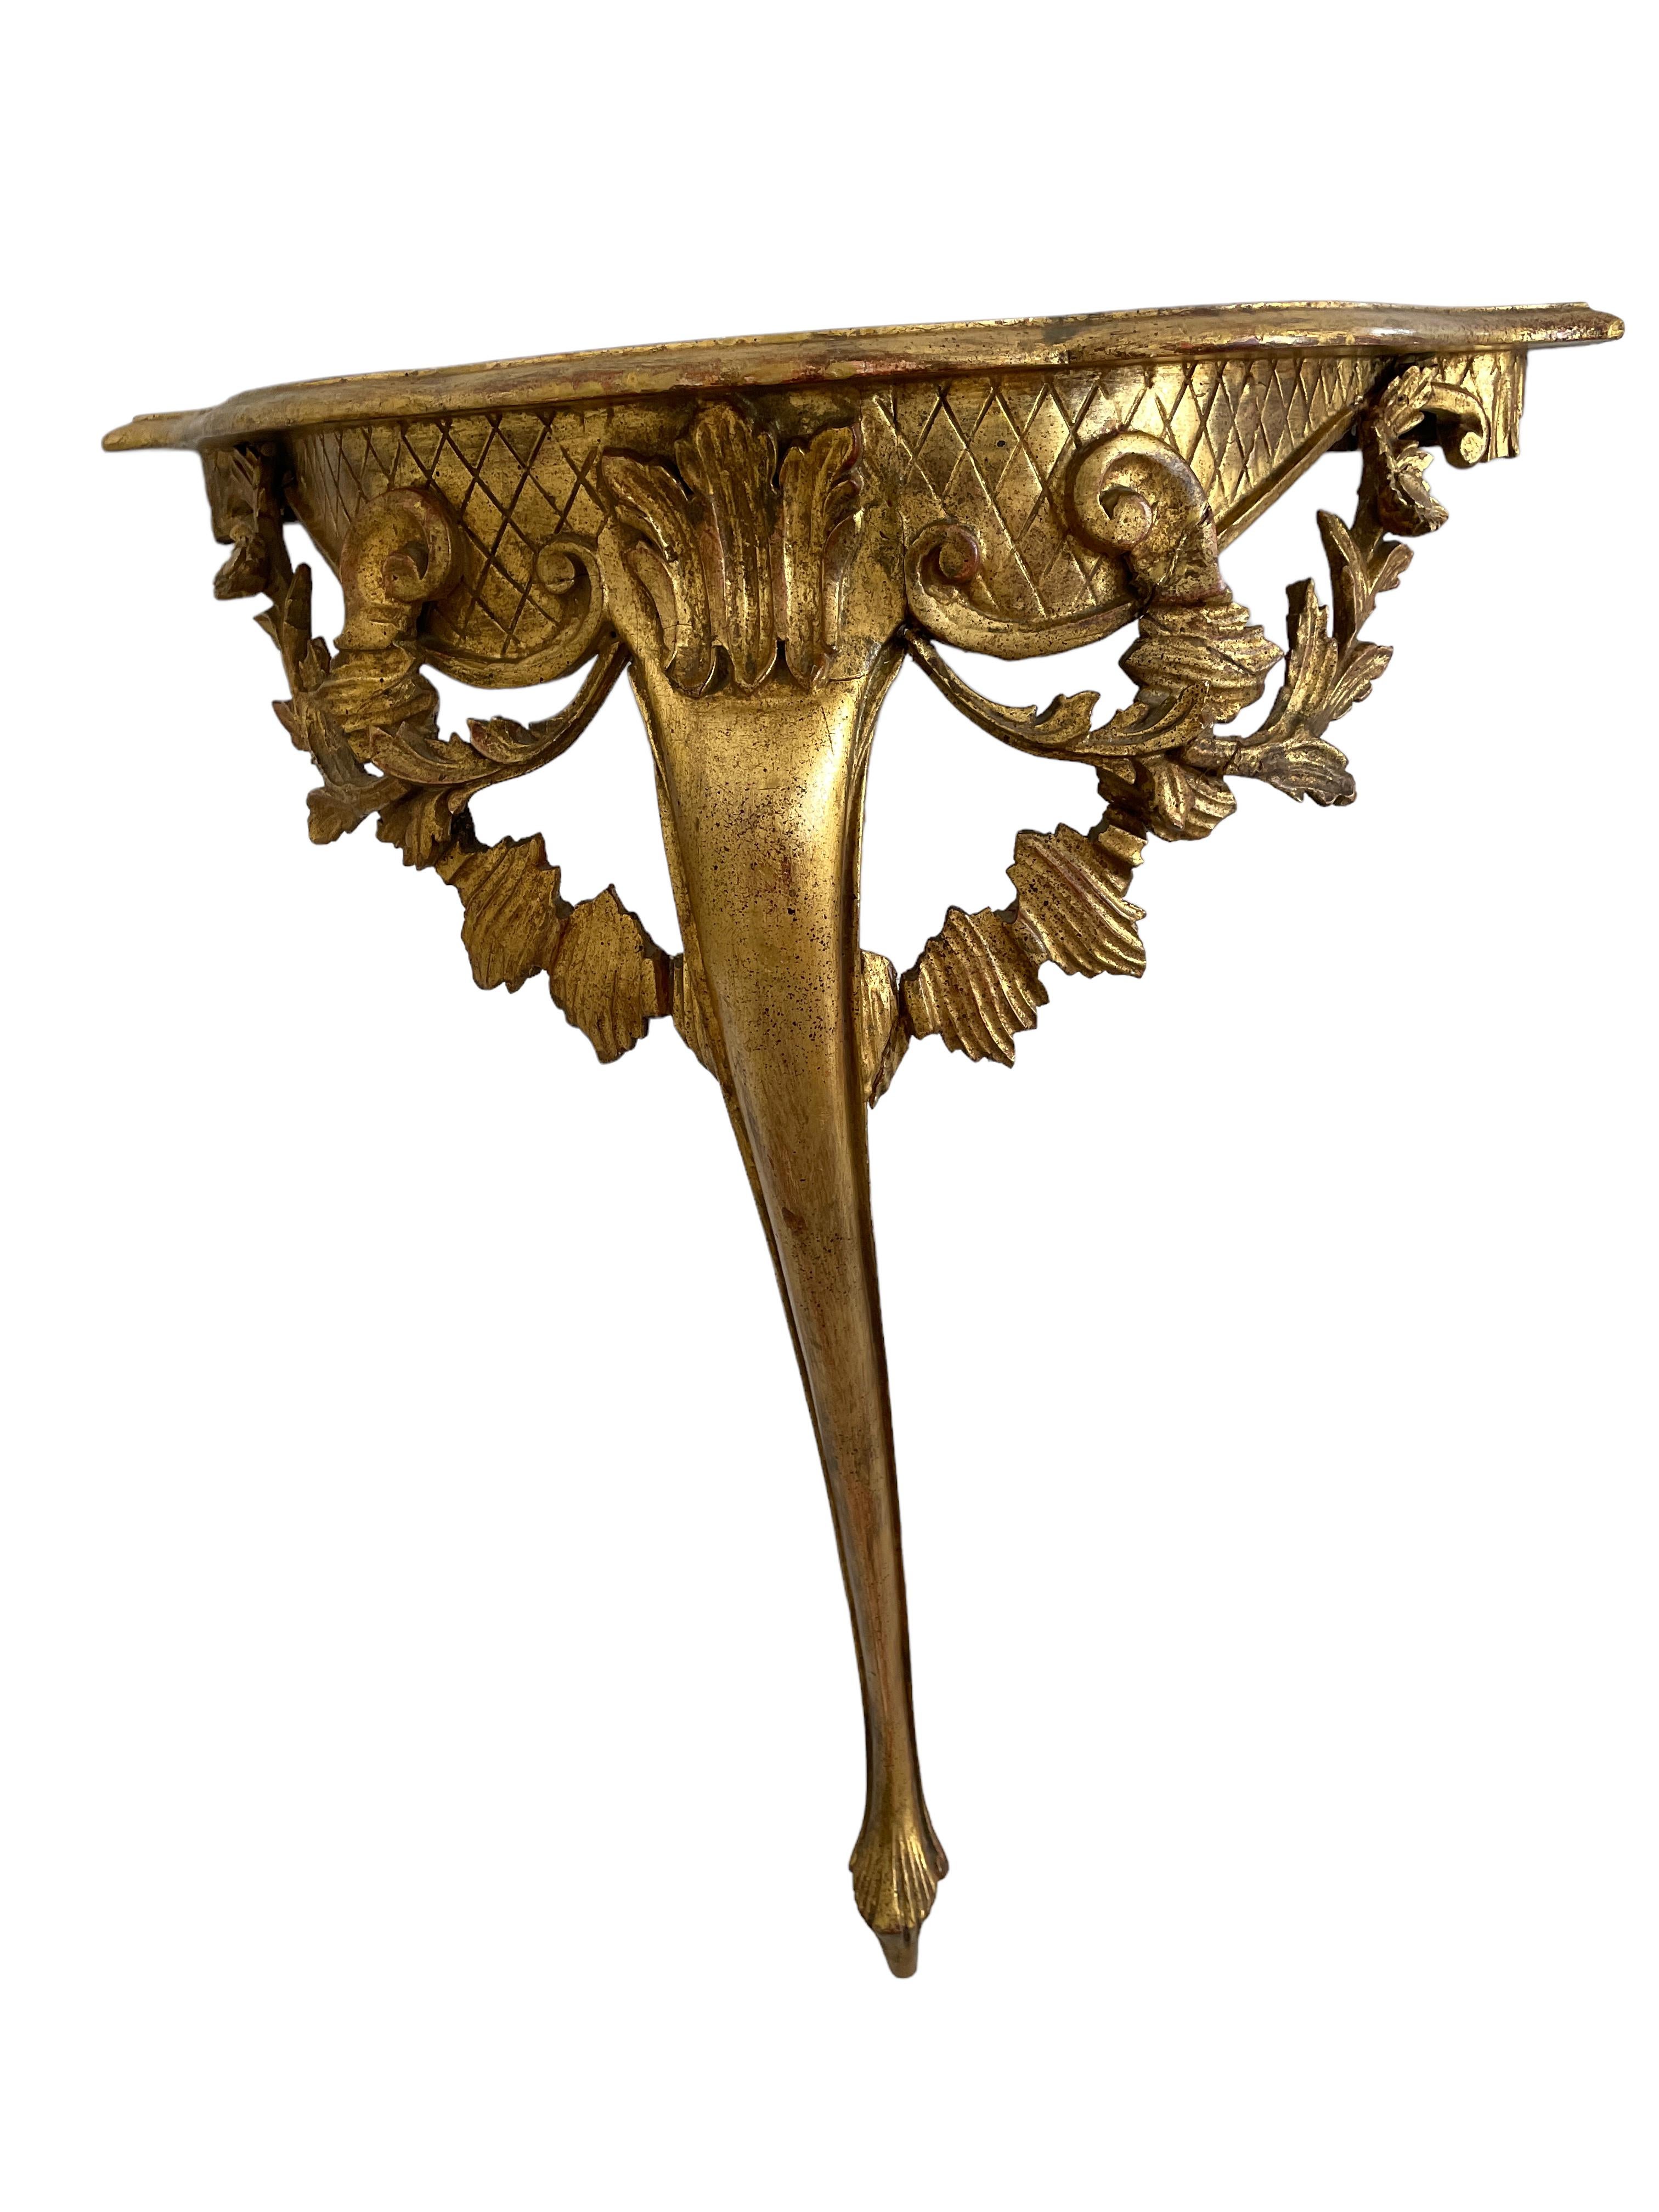 Vintage Hollywood Regency Tole Toleware Wall Console Table, Gilded Carved Wood 7